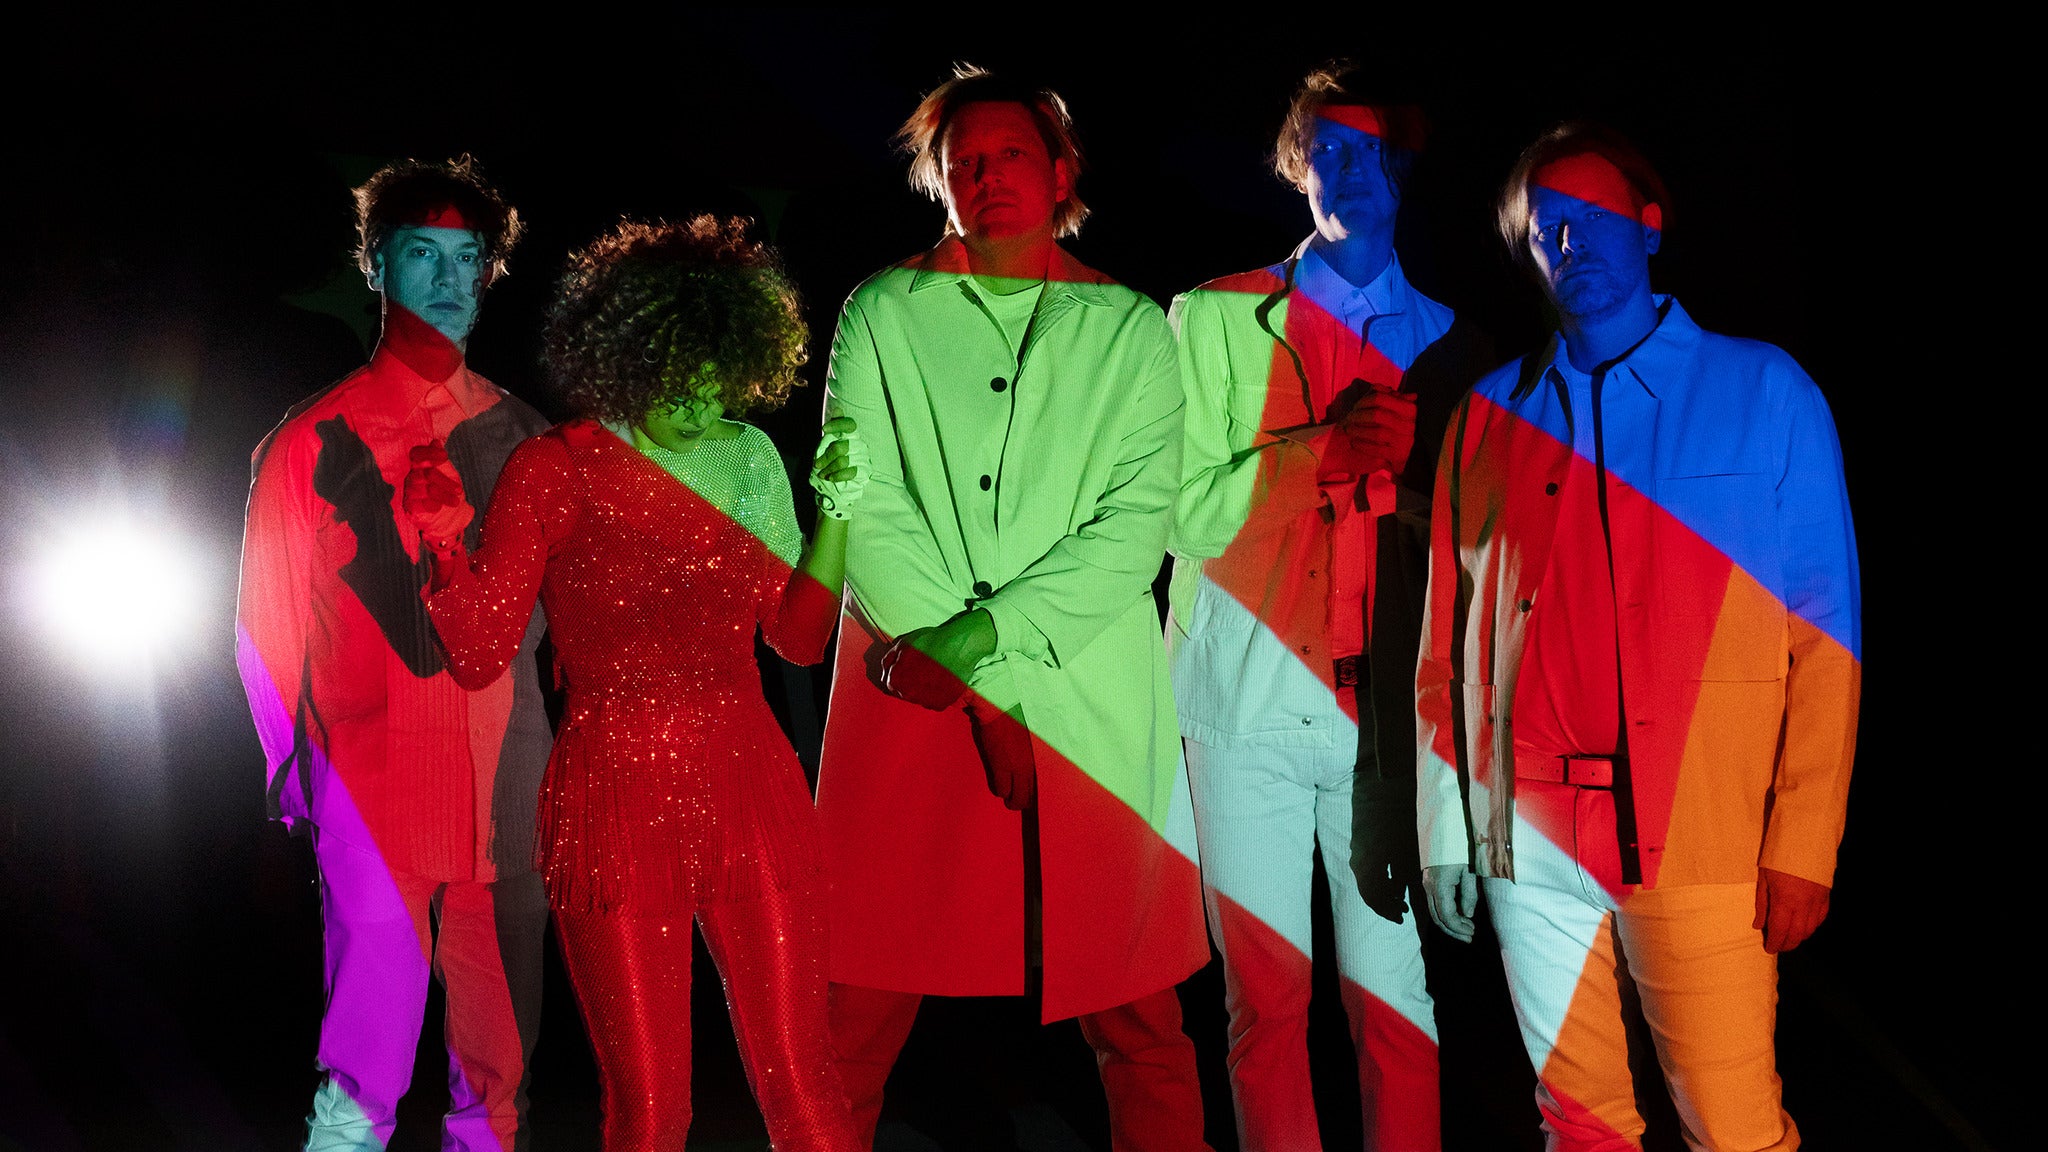 Arcade Fire presents: The "WE" Tour